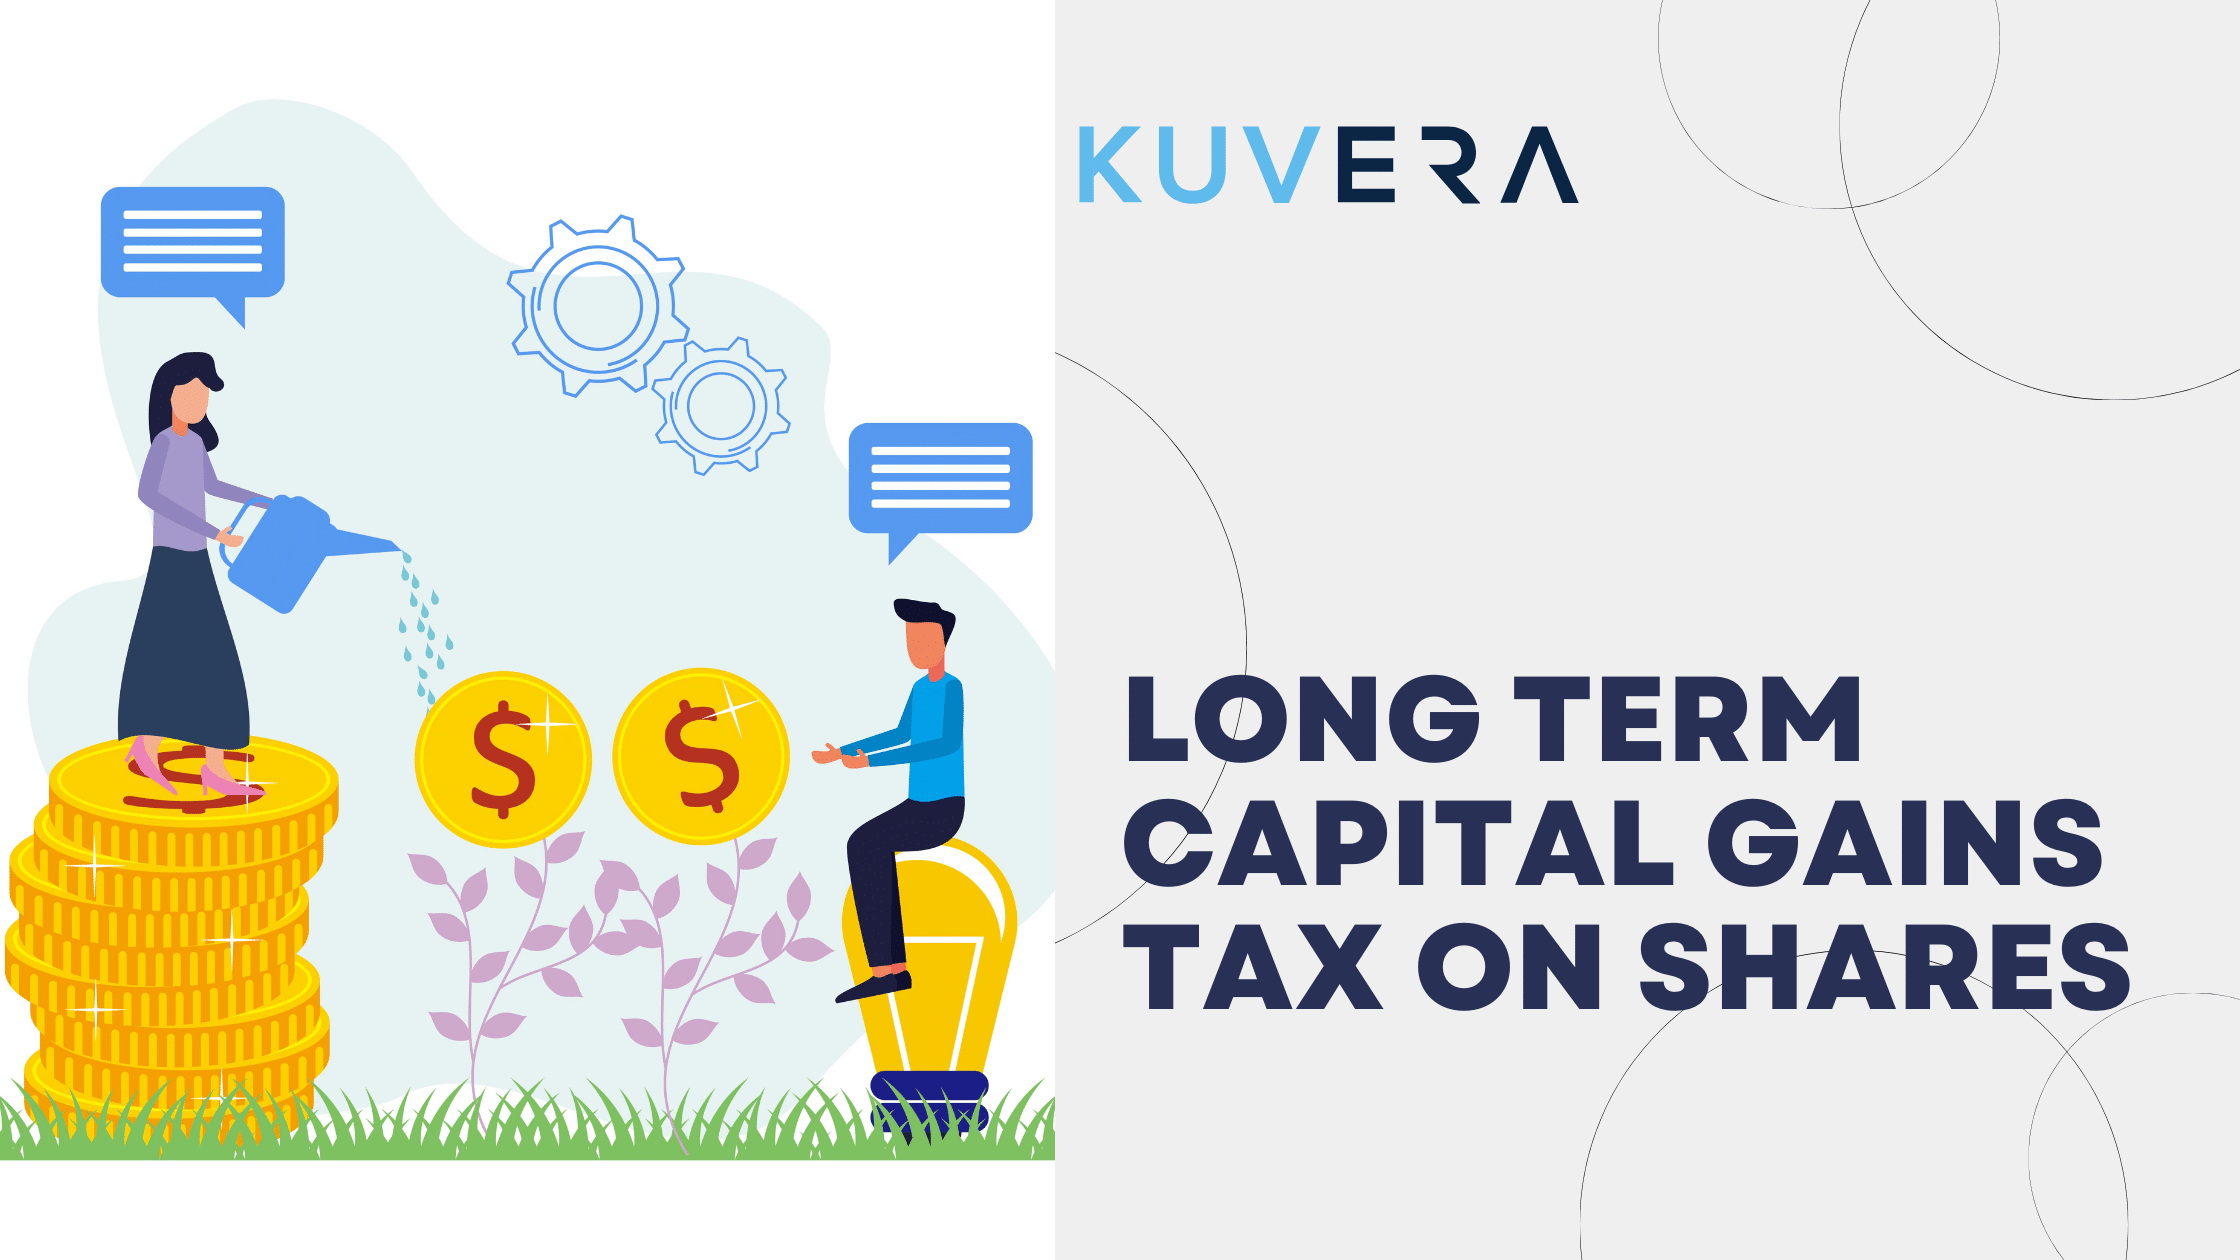 everything-to-know-about-long-term-capital-gains-tax-on-shares-kuvera